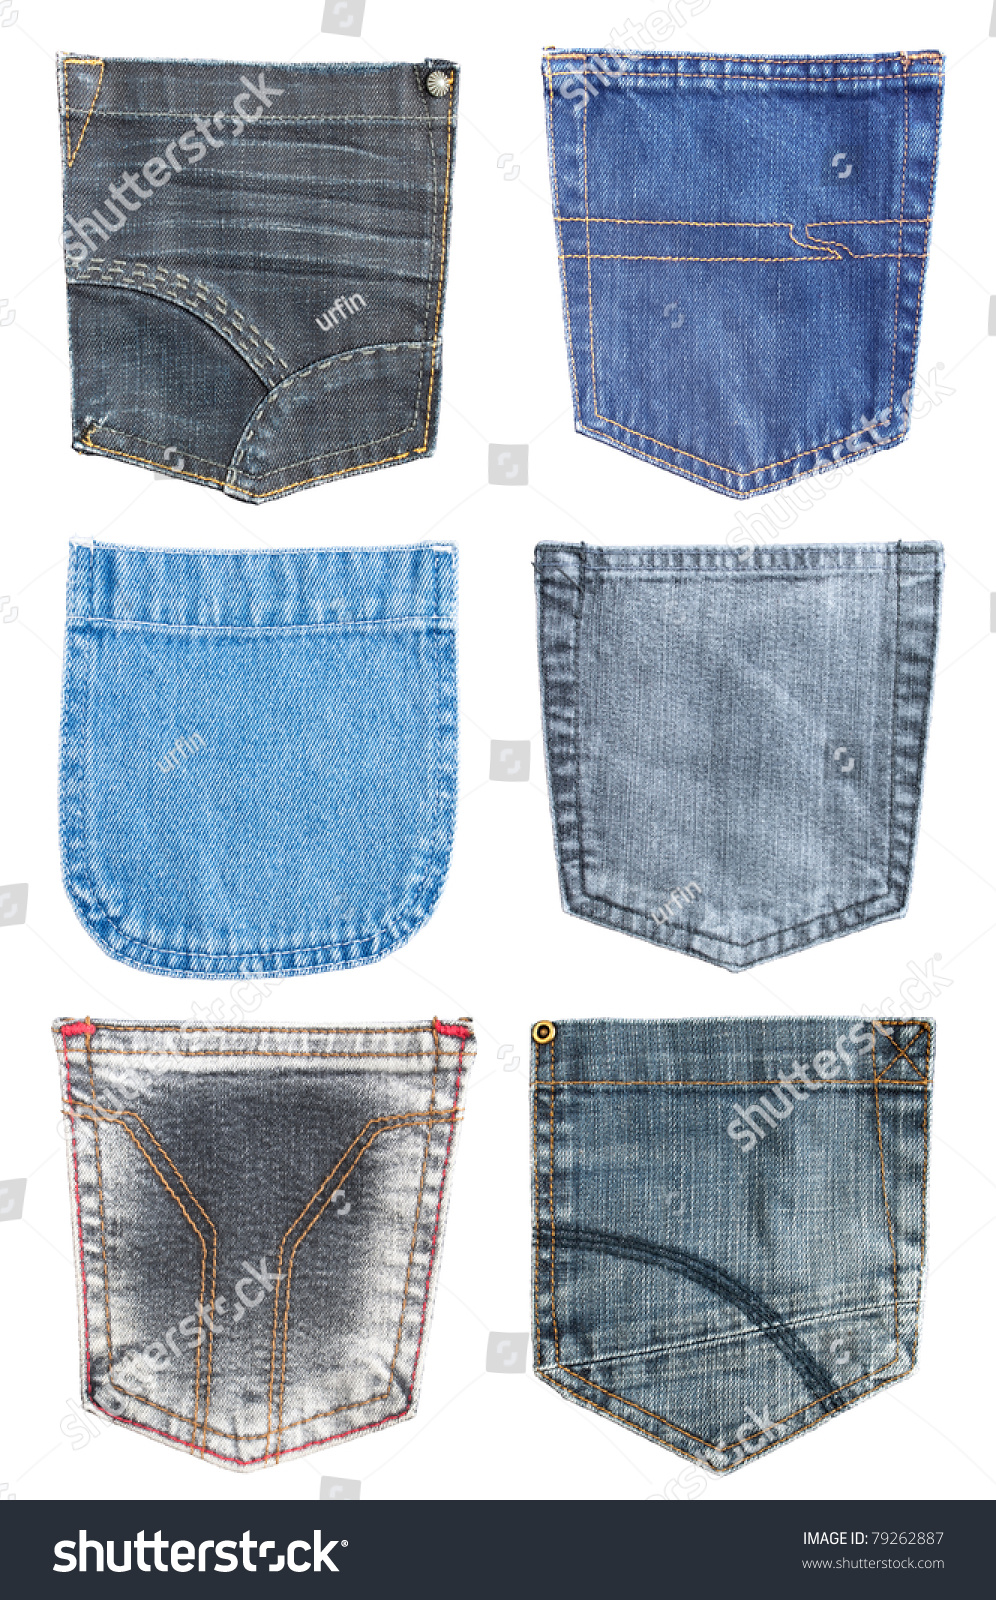 Jeans Pockets Collection Isolated On White Stock Photo 79262887 ...